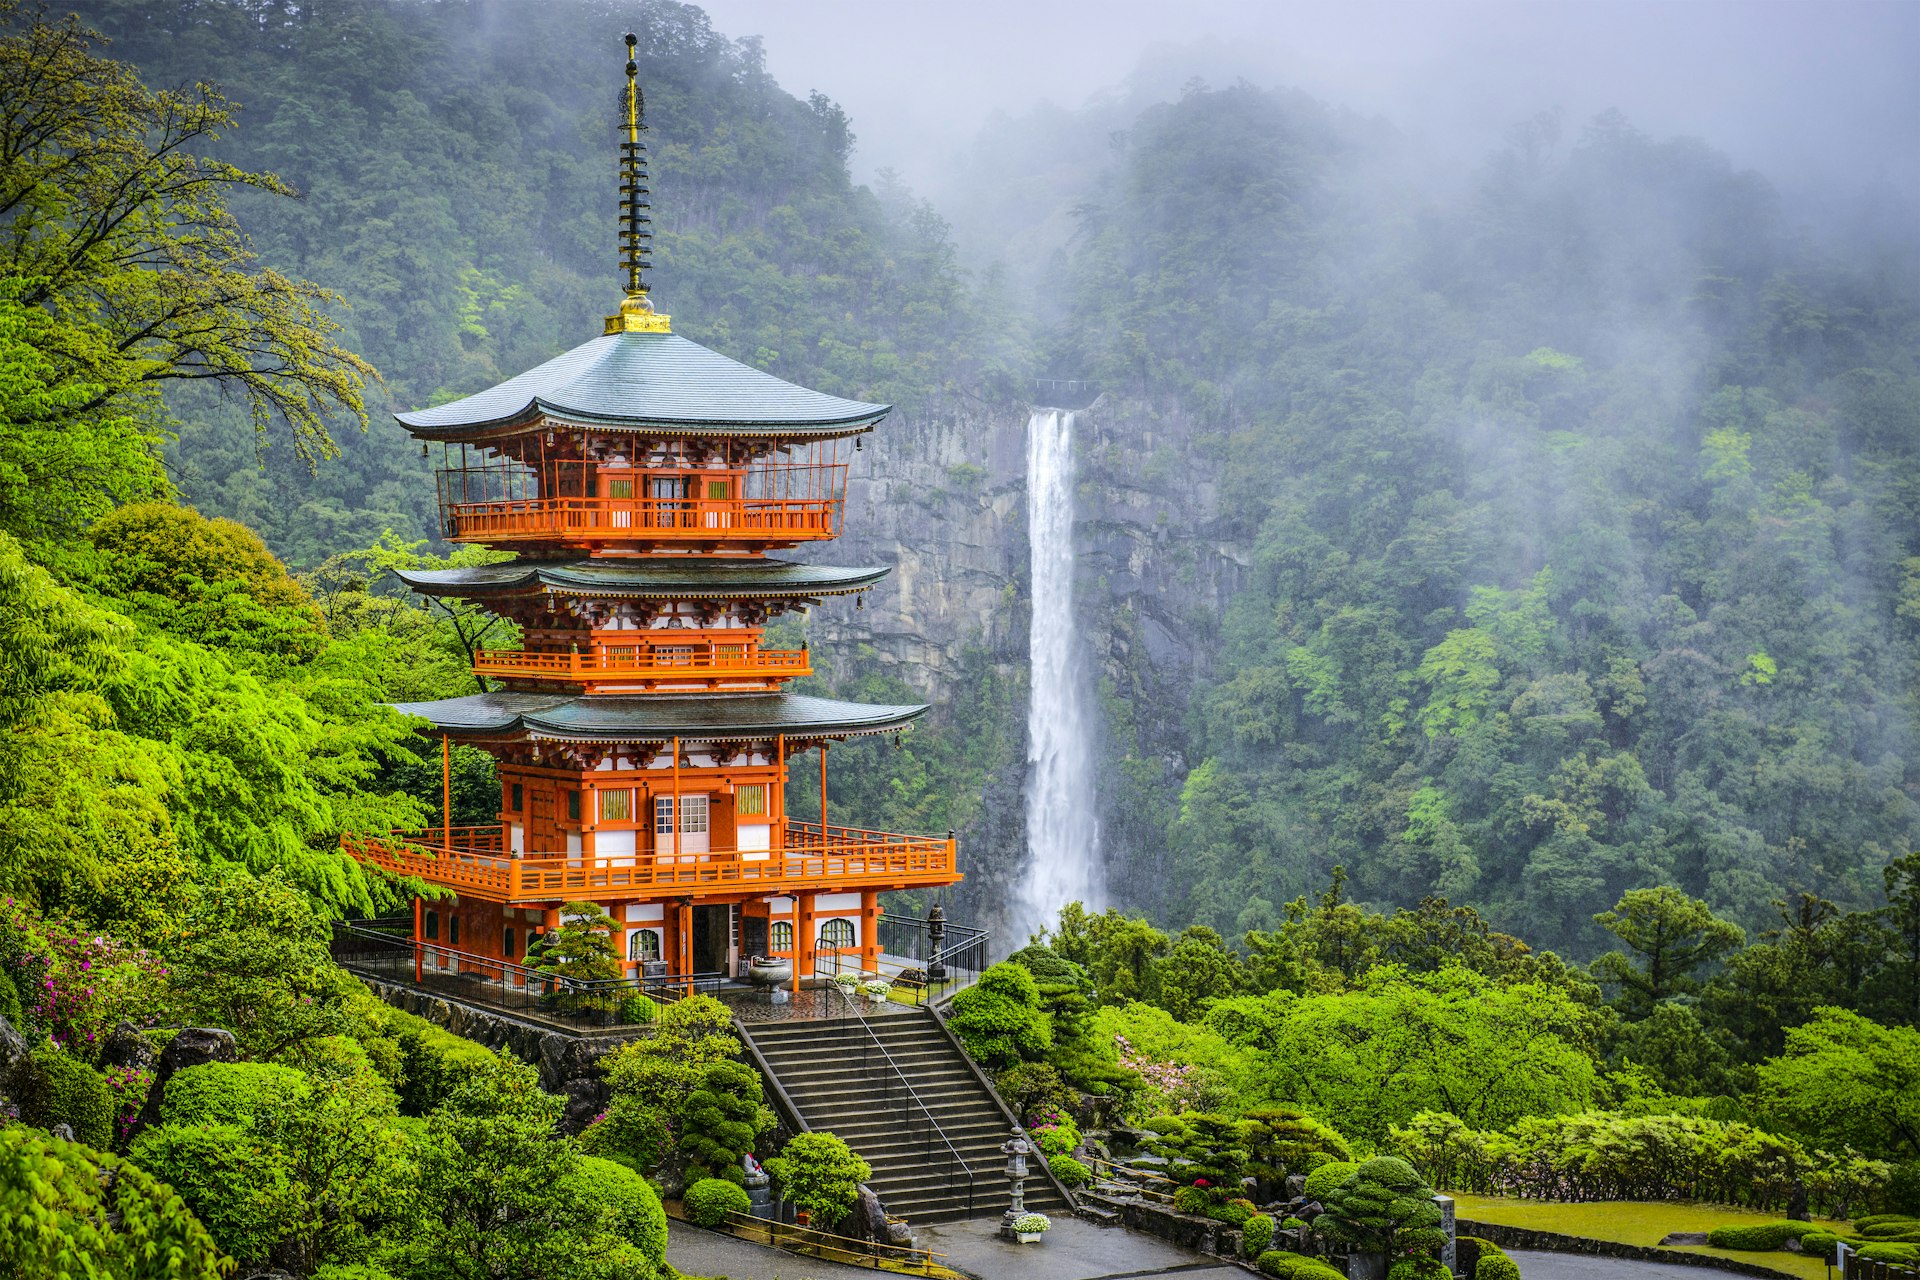 A red-roofed many tiered pagoda in the foreground, with a narrow, tall waterfall dropping amongst greenery in the background. Mist is descending over the hills